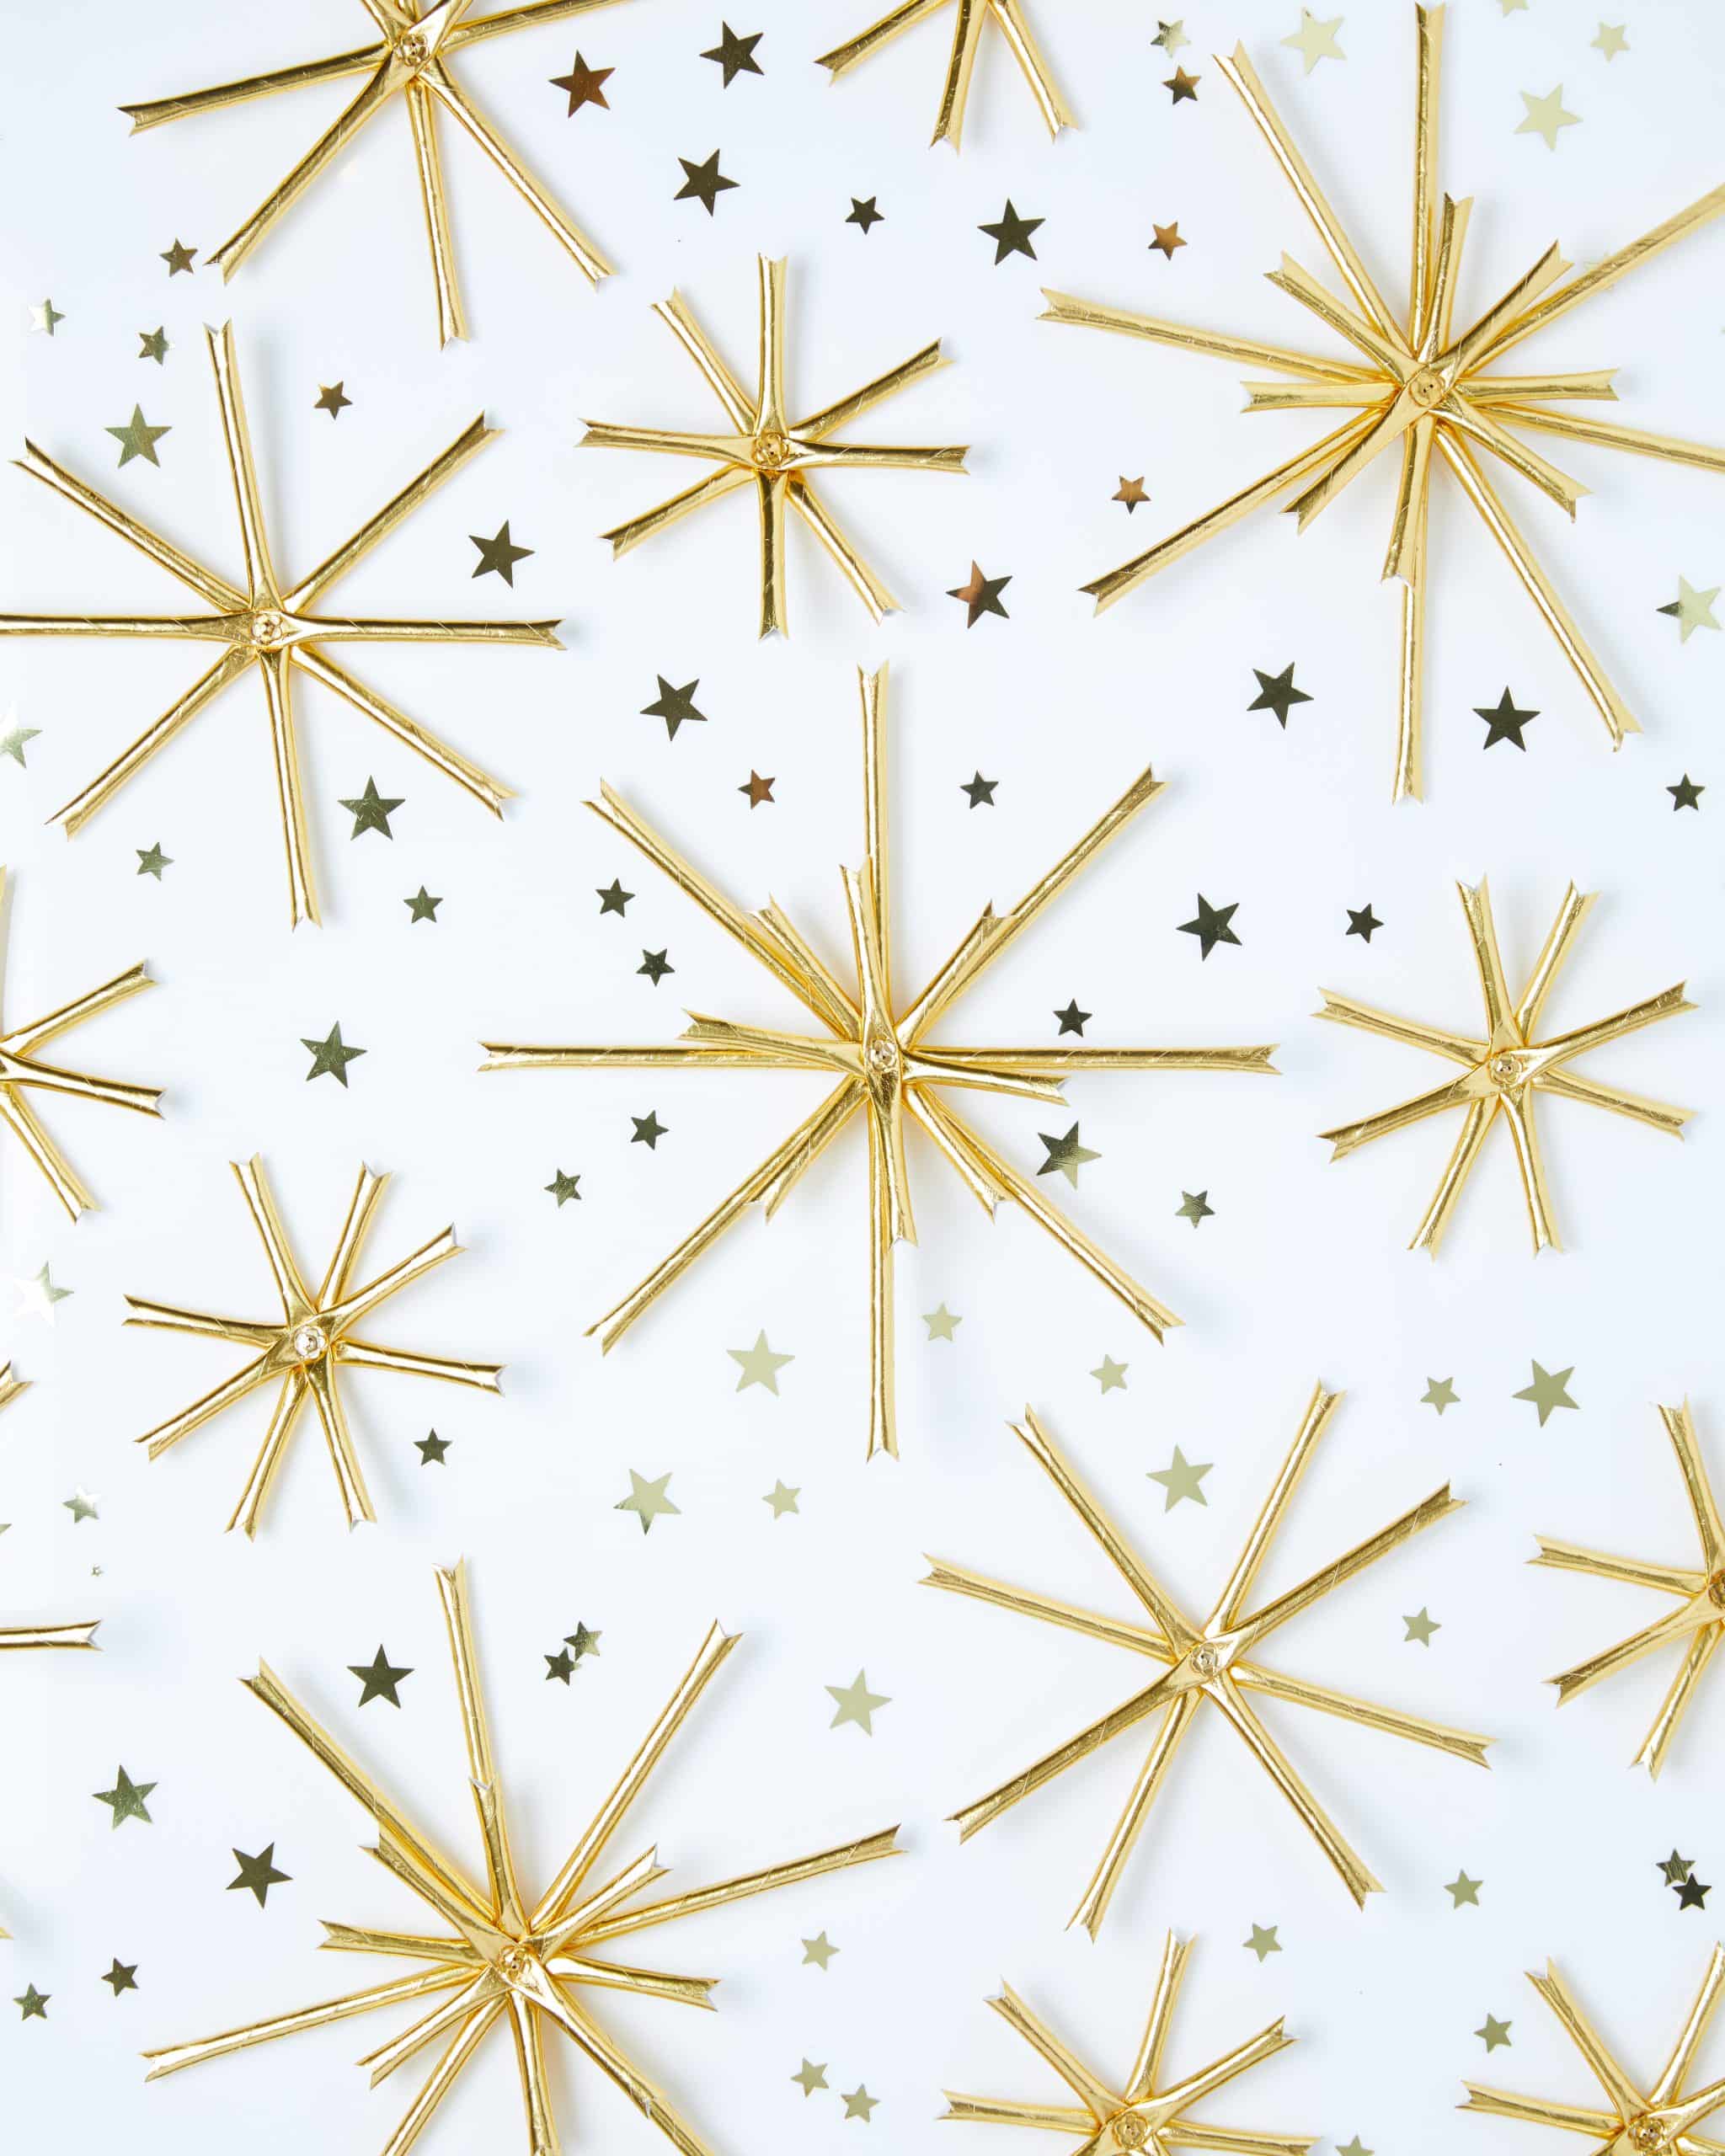 Make These Shooting Star Paper Straw Toppers for Your Next Party